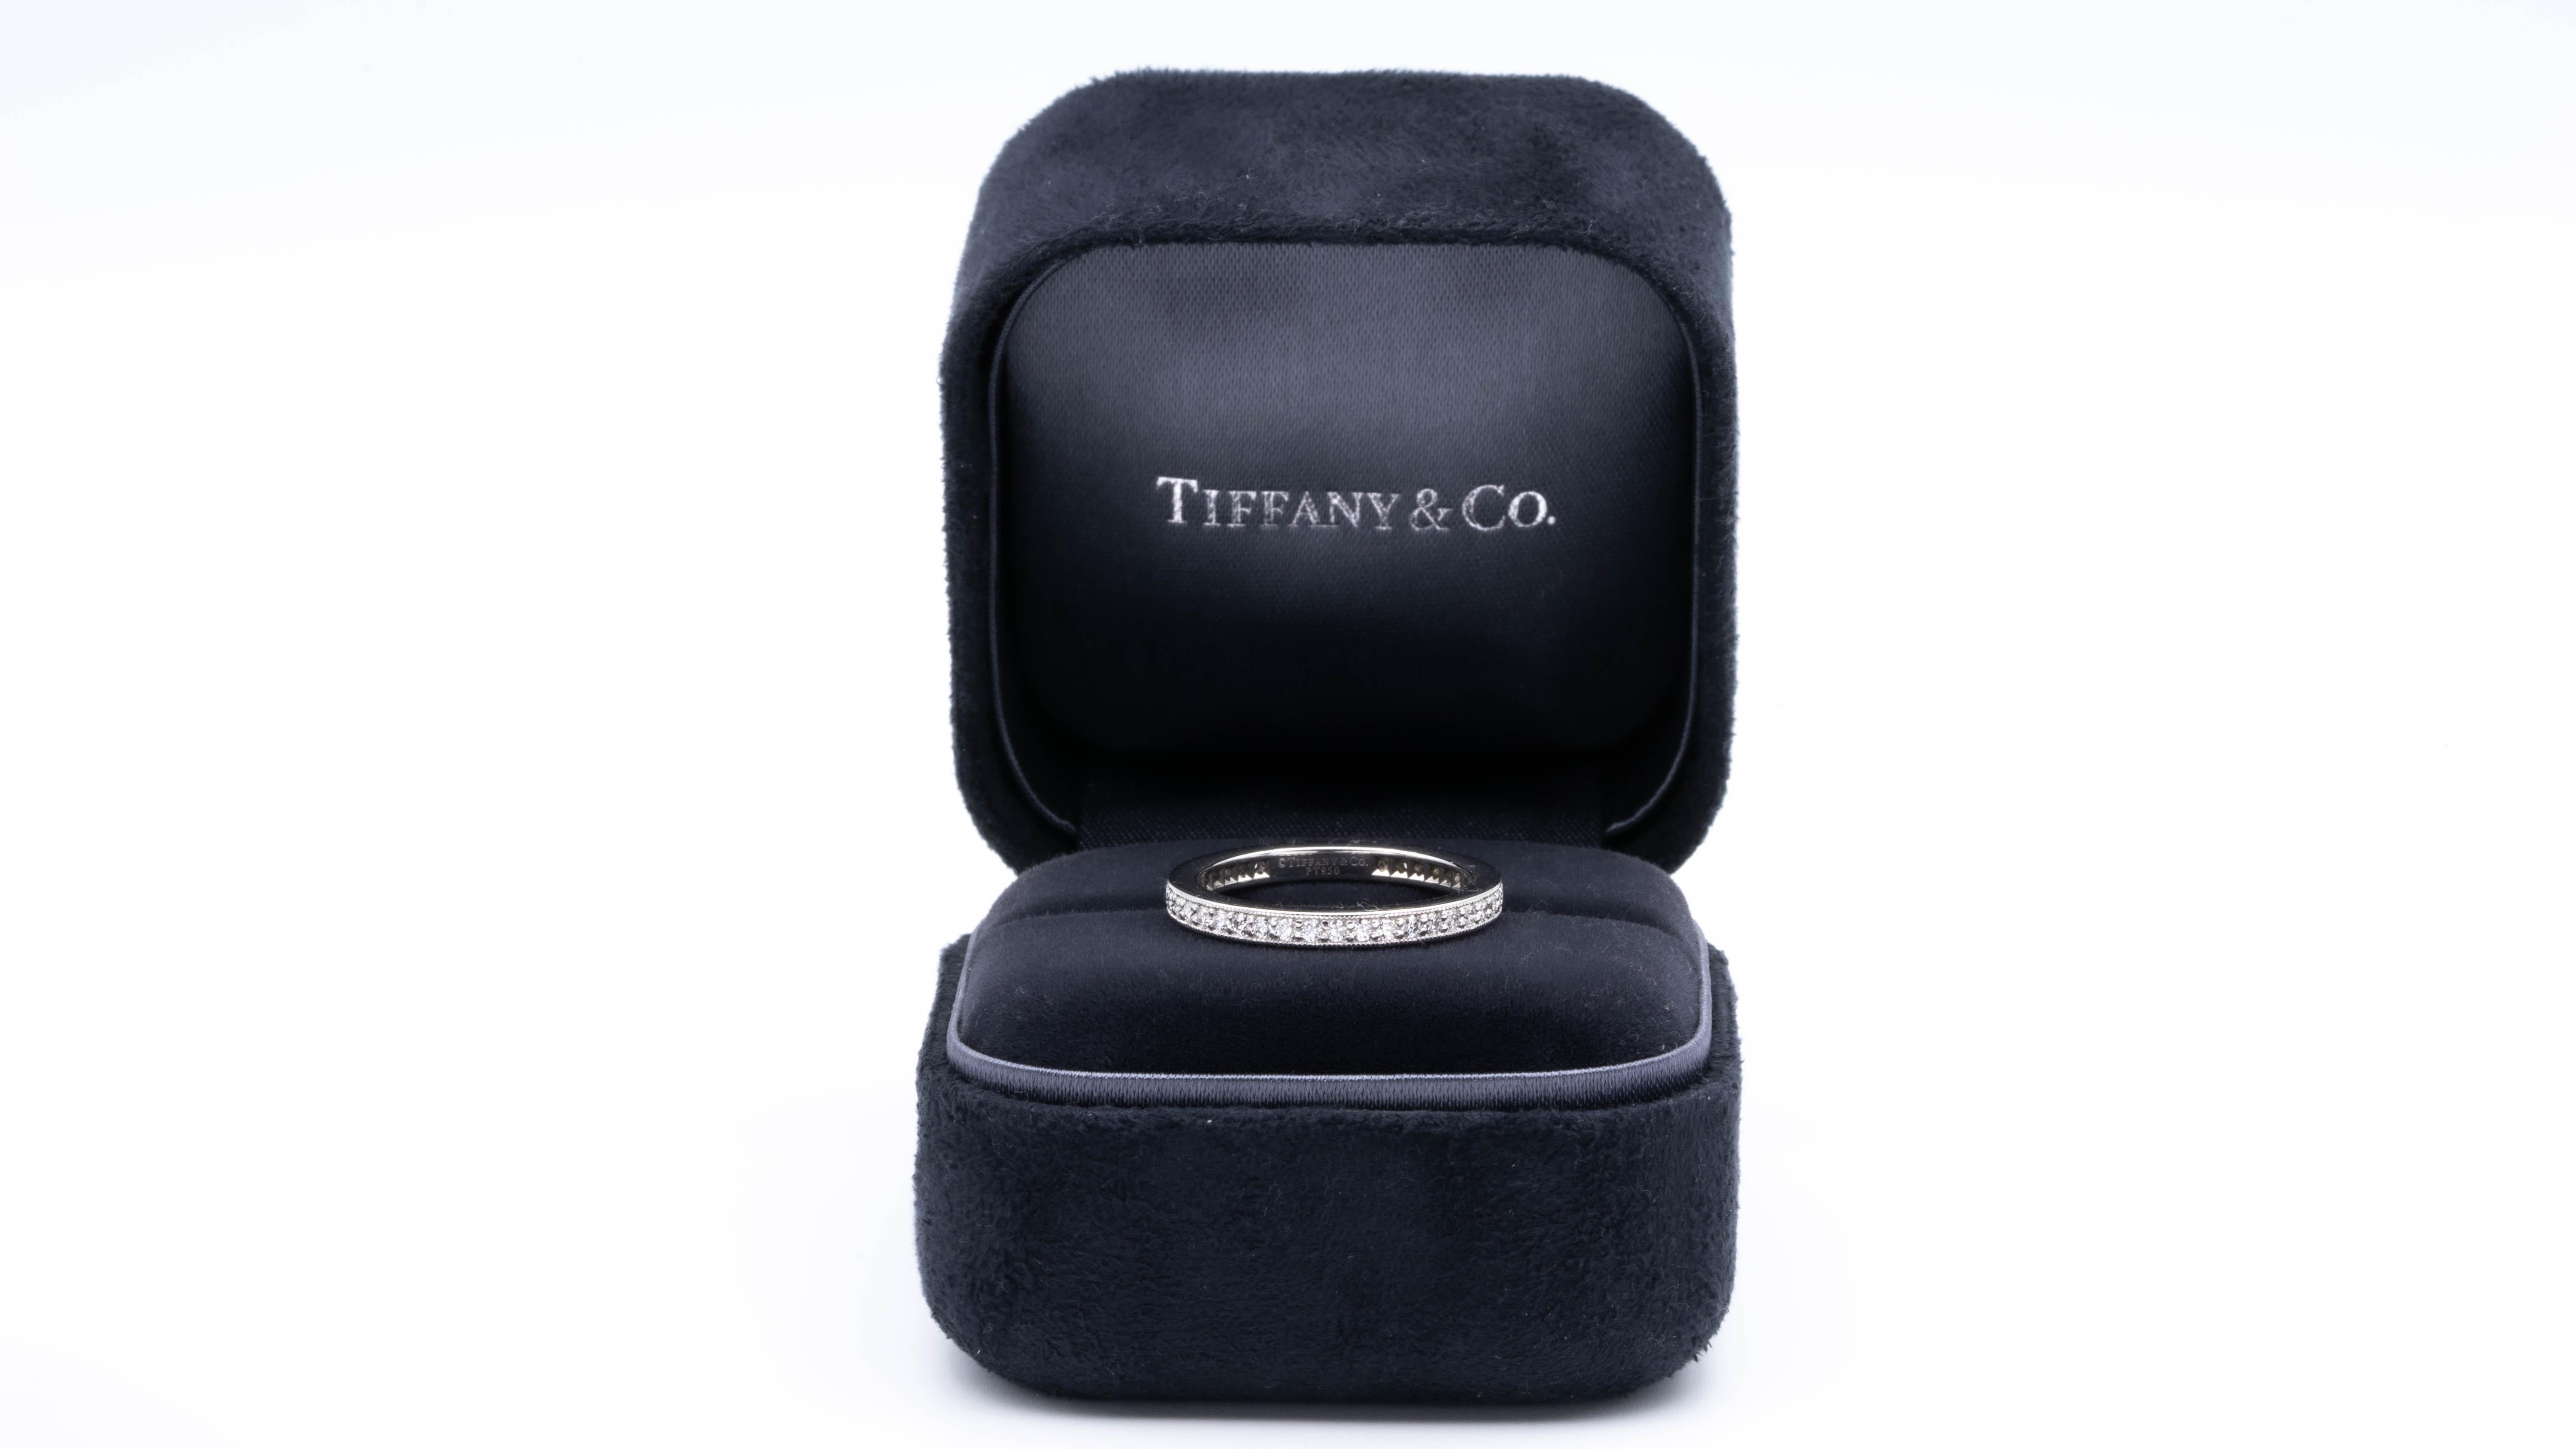 Tiffany & Co. Legacy Eternity band with full circle of round brilliant cut diamonds bead set in a mil-grain edge channel,  weighing 0.41 carats total weight.
This design give the band an antique Edwardian look. 
Comes in Tiffany Box 

Stamp: Tiffany